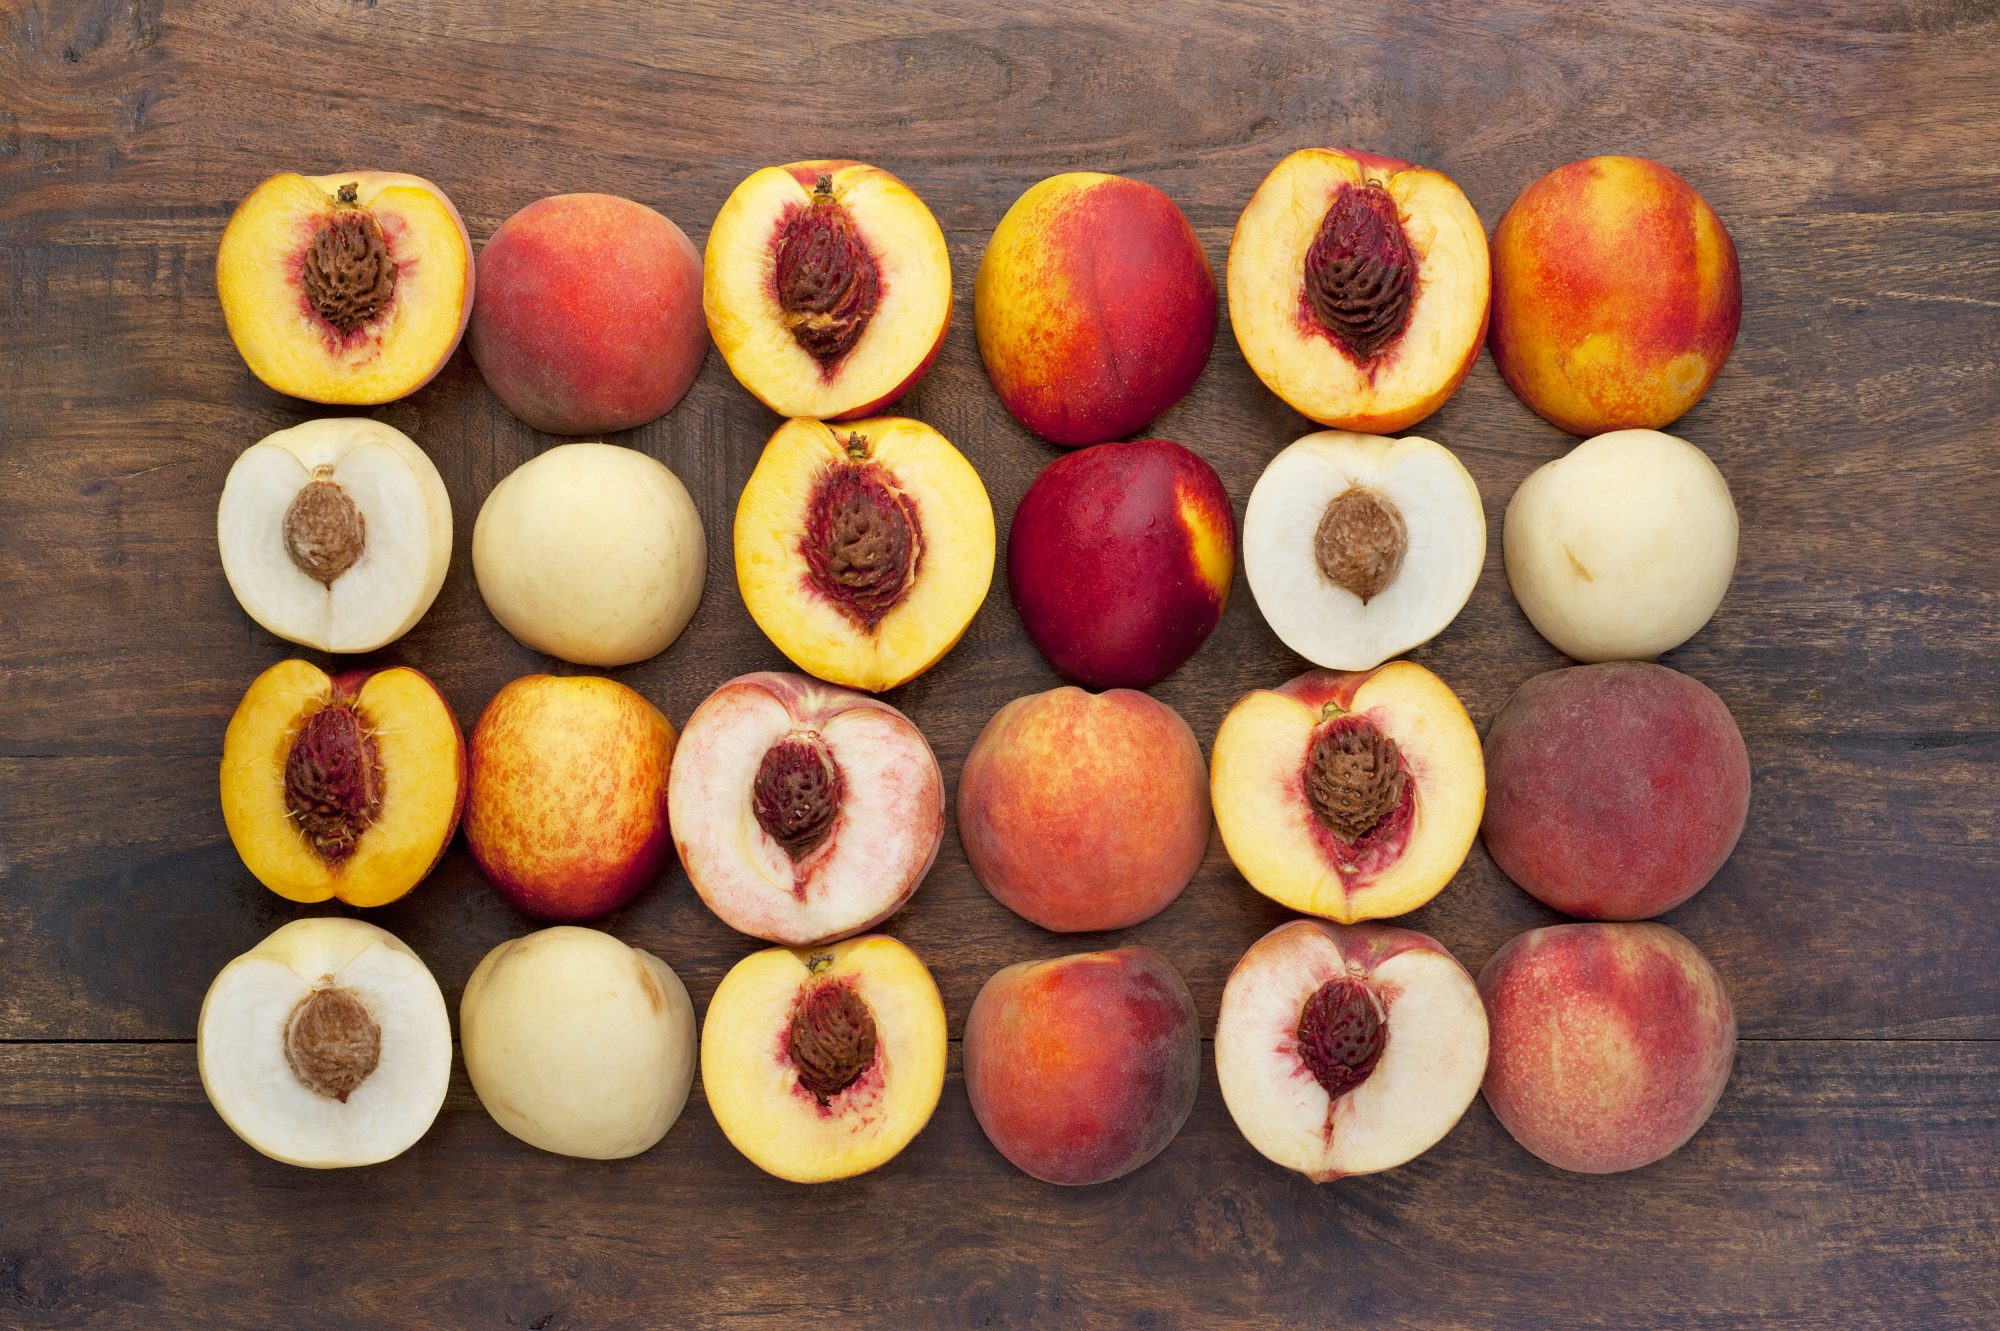 Difference between Peaches and Nectarines